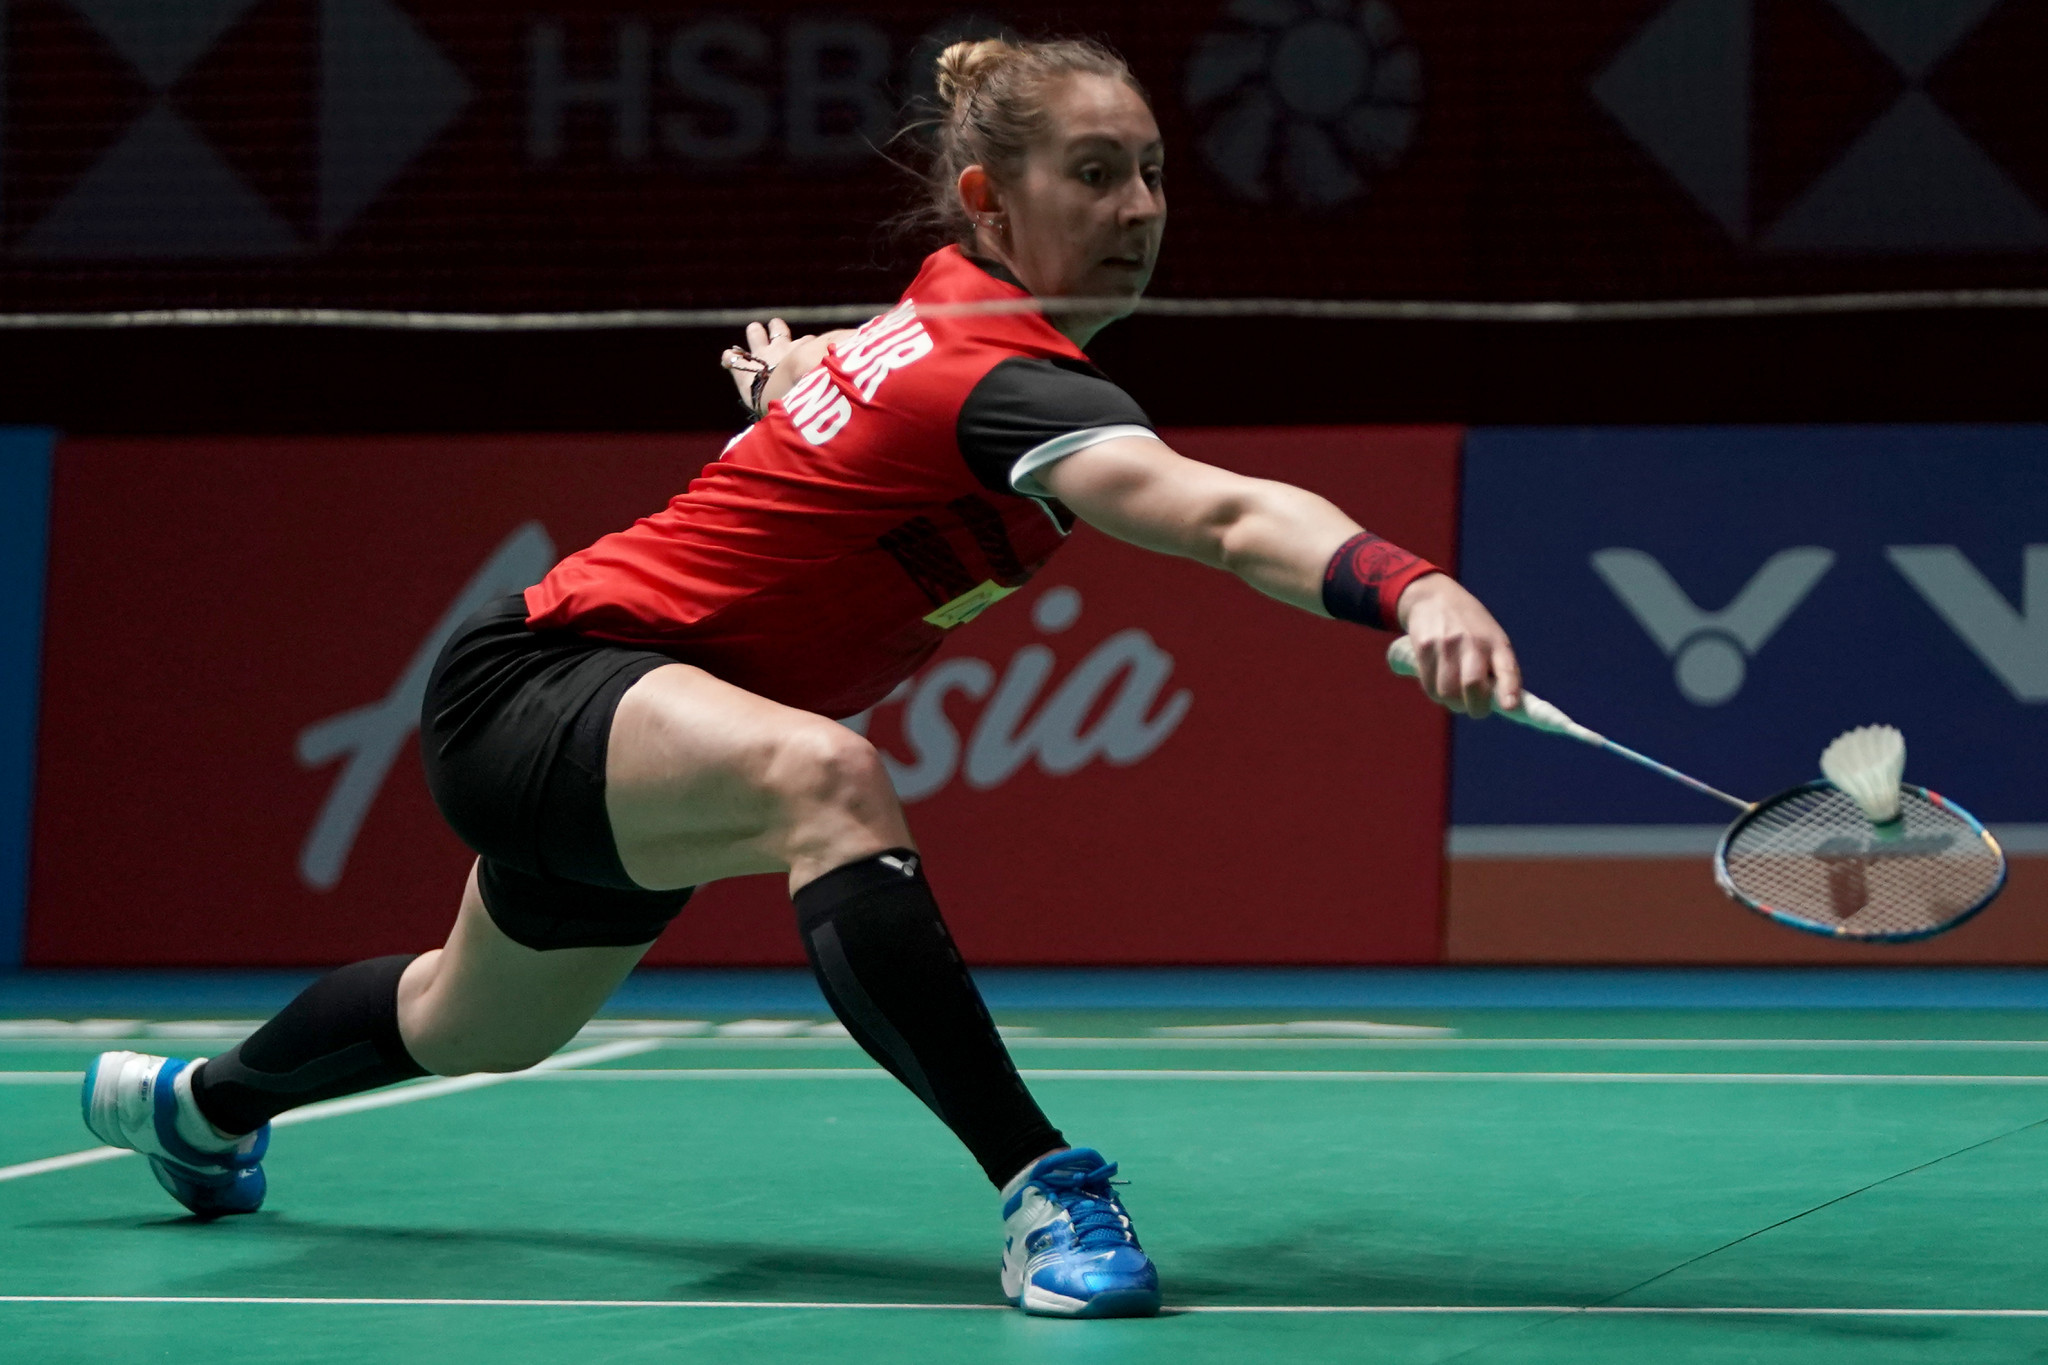 Scotland’s Gilmour misses title by a fraction in BWF Russian Open women’s final